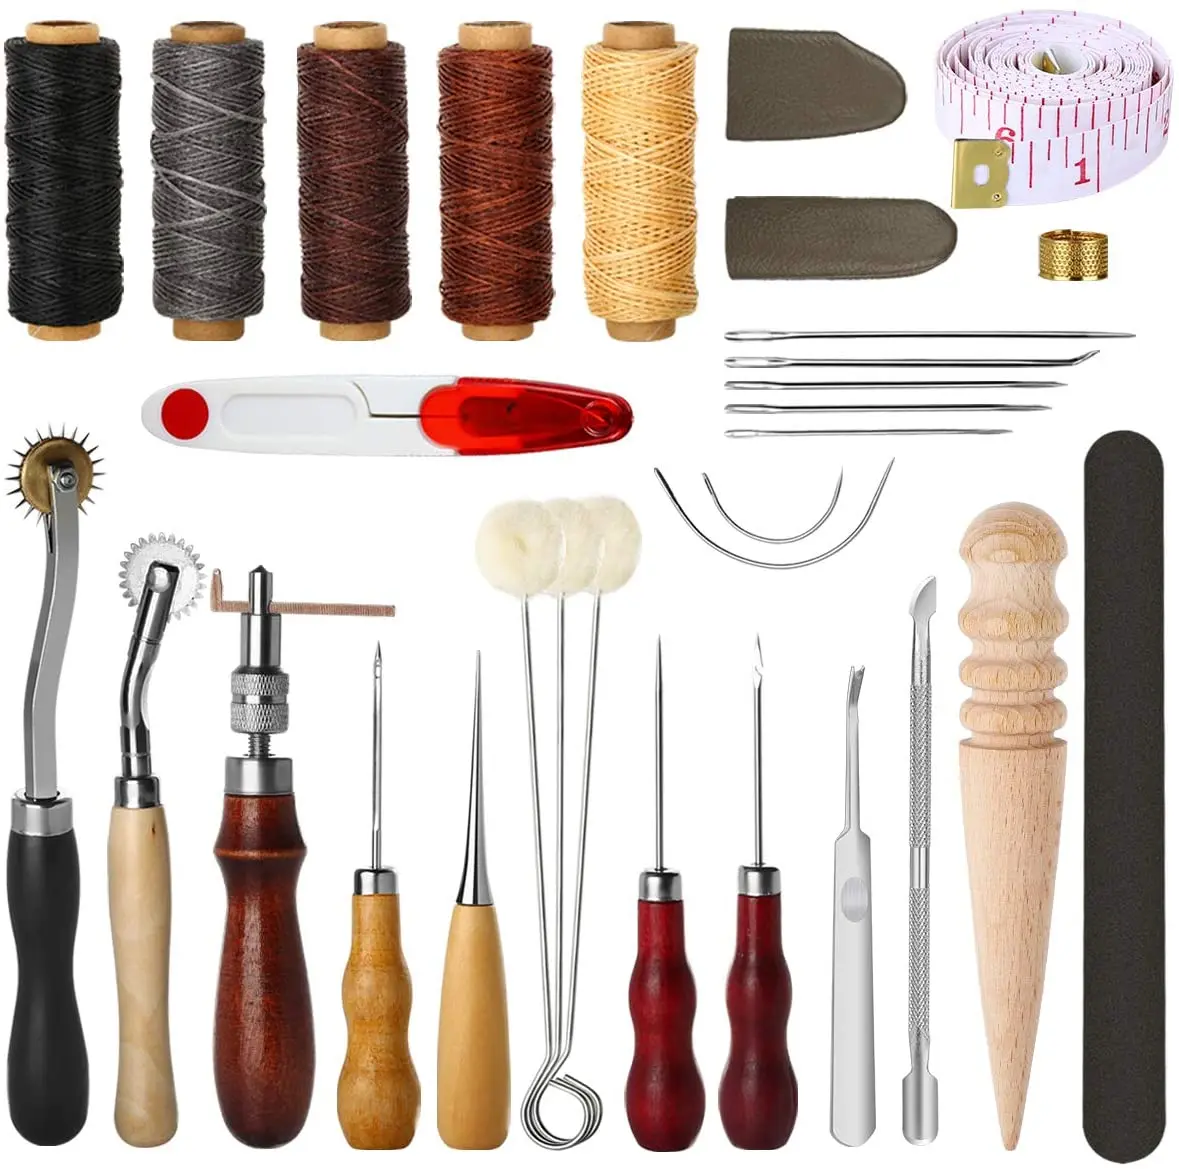 

31 Pcs Leather Sewing Tools DIY Leather Craft Tools Hand Stitching Tool Set with Groover Awl Waxed Thread Thimble Kit